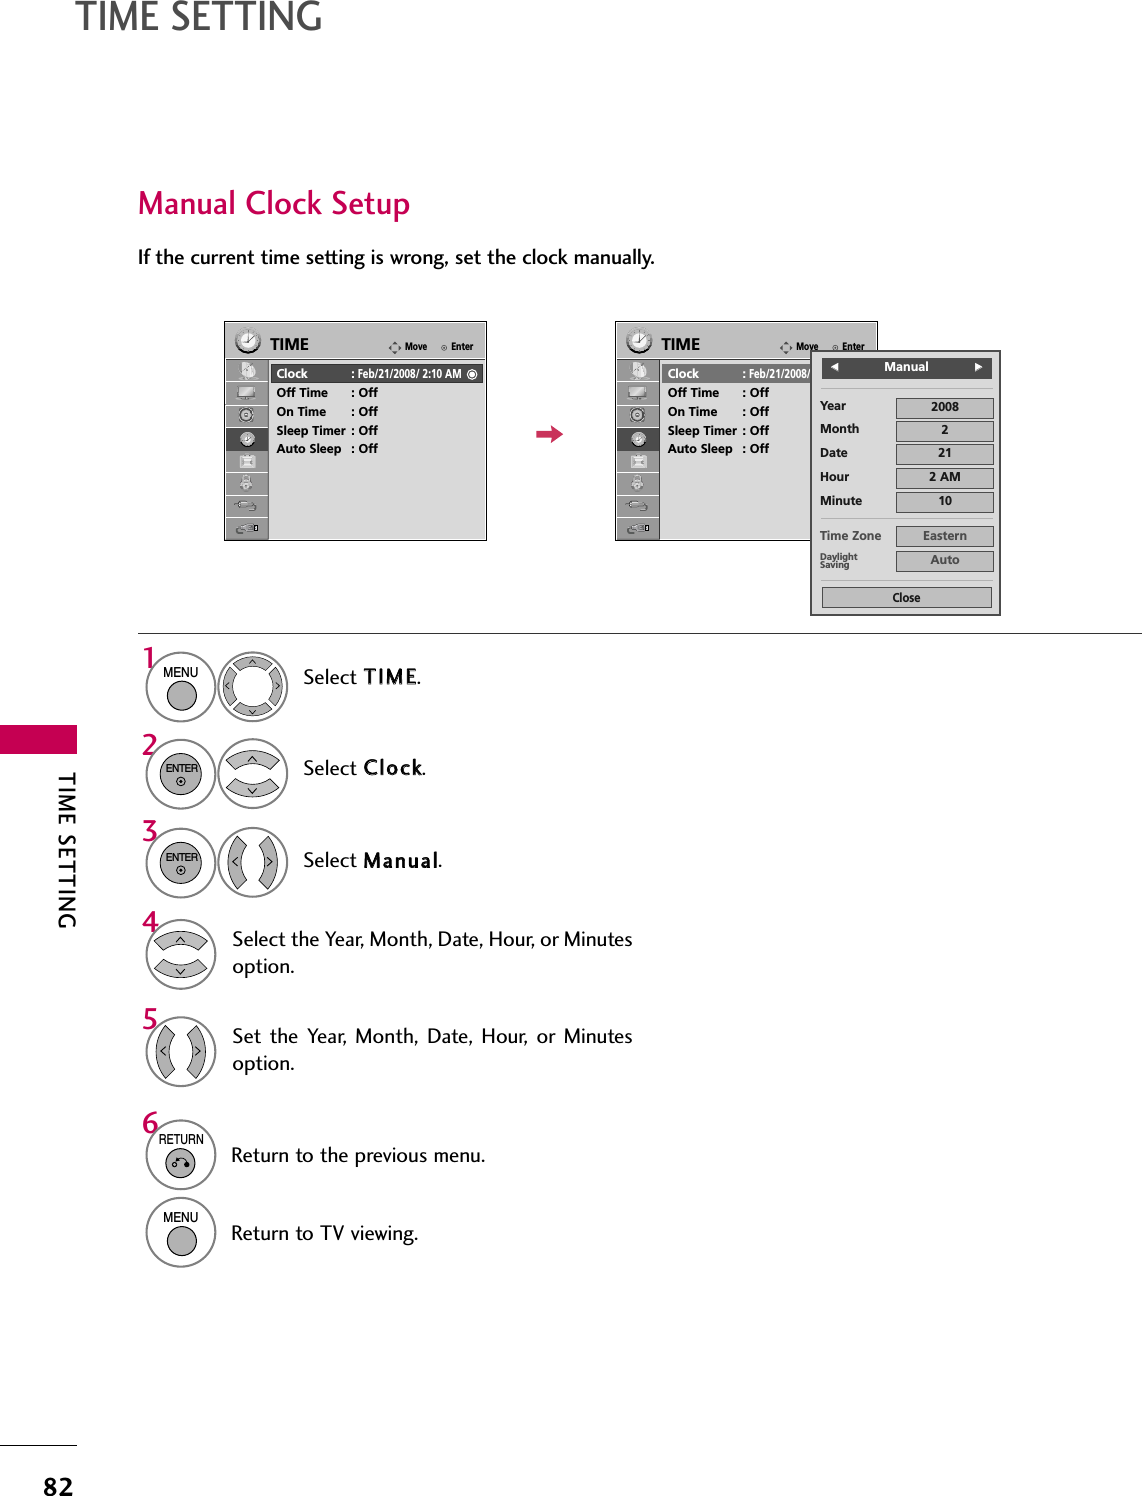 TIME SETTING82TIME SETTINGManual Clock SetupIf the current time setting is wrong, set the clock manually.Select TTIIMMEE.Select CClloocckk.Select MMaannuuaall.1MENU32ENTERENTERSelect the Year, Month, Date, Hour, or Minutesoption.4Set the  Year,  Month,  Date,  Hour,  or  Minutesoption.56RETURNReturn to the previous menu.MENUReturn to TV viewing.EnterMoveTIMEClock :Feb/21/2008/ 2:10 AMOff Time : OffOn Time : OffSleep Timer : OffAuto Sleep : OffEnterMoveTIMEClock :Feb/21/2008/ 2:10 AMOff Time : OffOn Time : OffSleep Timer : OffAuto Sleep : OffYearMonth 2Date 21Hour 2 AM2008Minute 10Time Zone EasternDaylightSaving AutoCloseFFManualGG